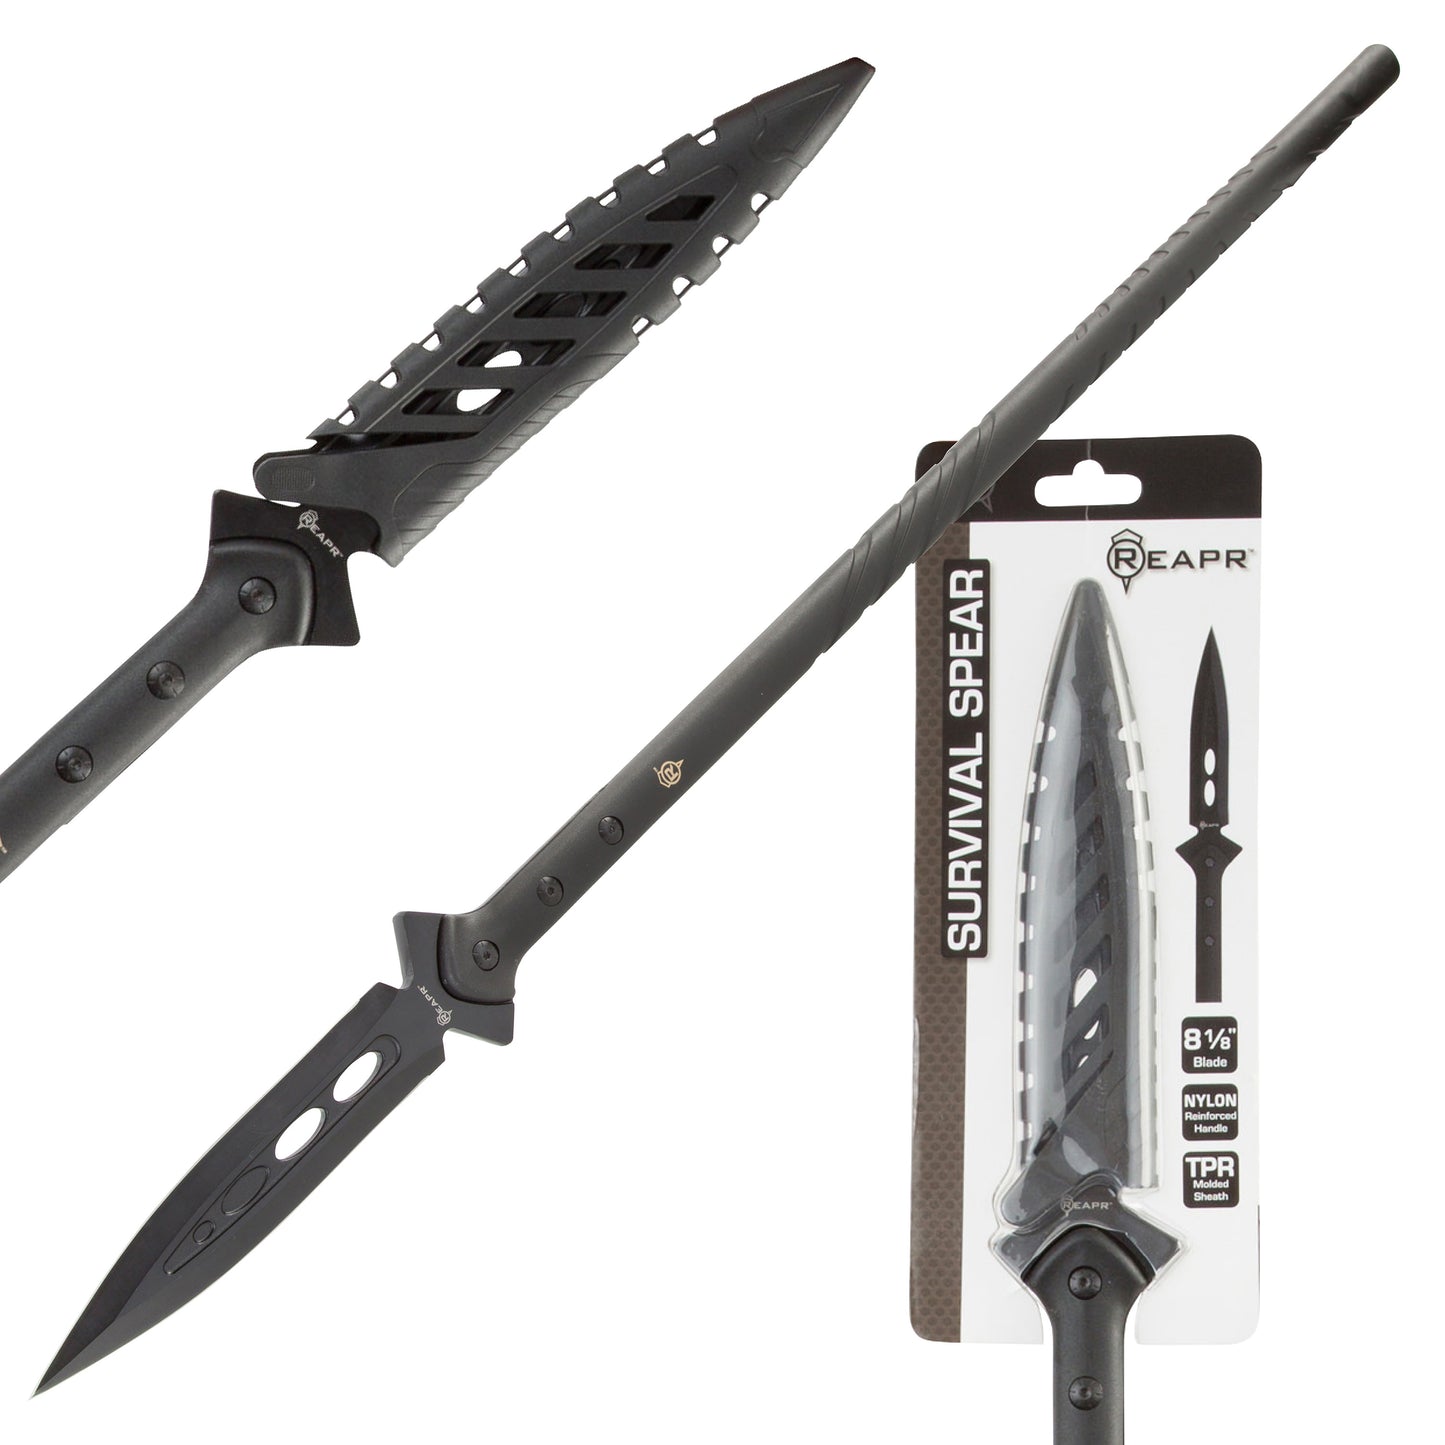 REAPR 11003 Survival Spear, stainless-steel double-edged blade for hunting, tactical uses, as well as general protection.